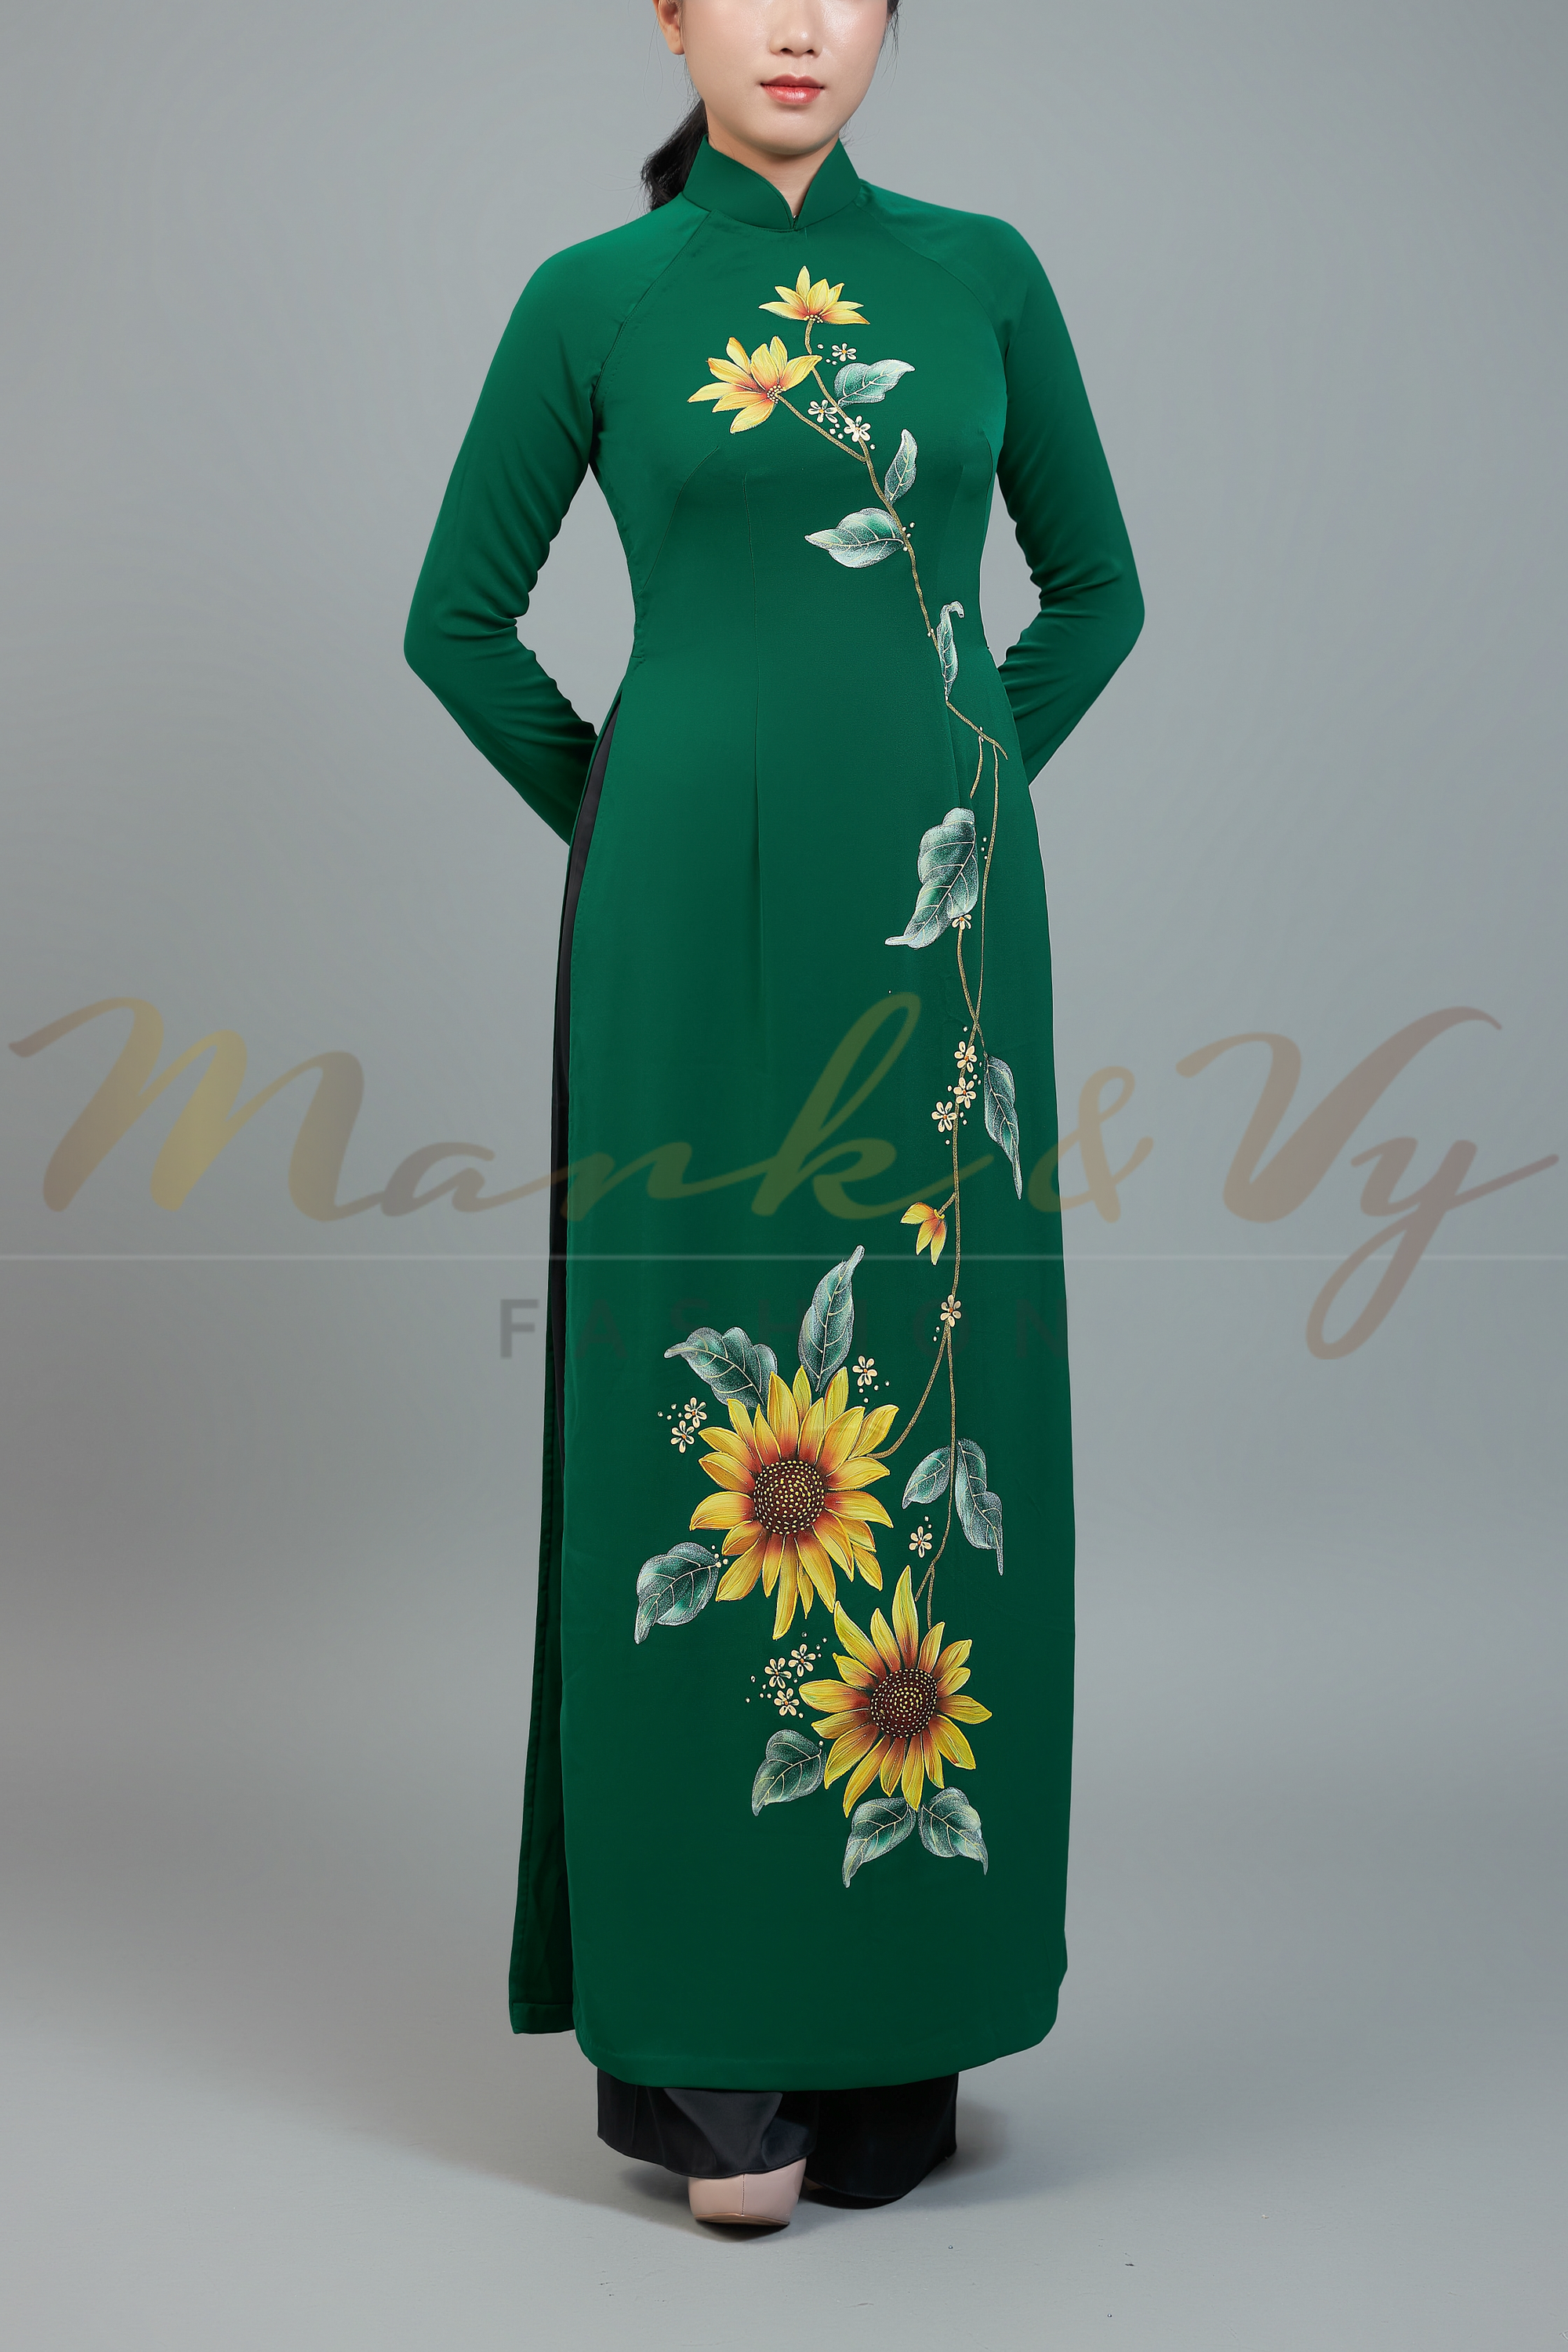 Custom made ao dai. Unique, hand-painted, floral motif on elegant, green fabric.